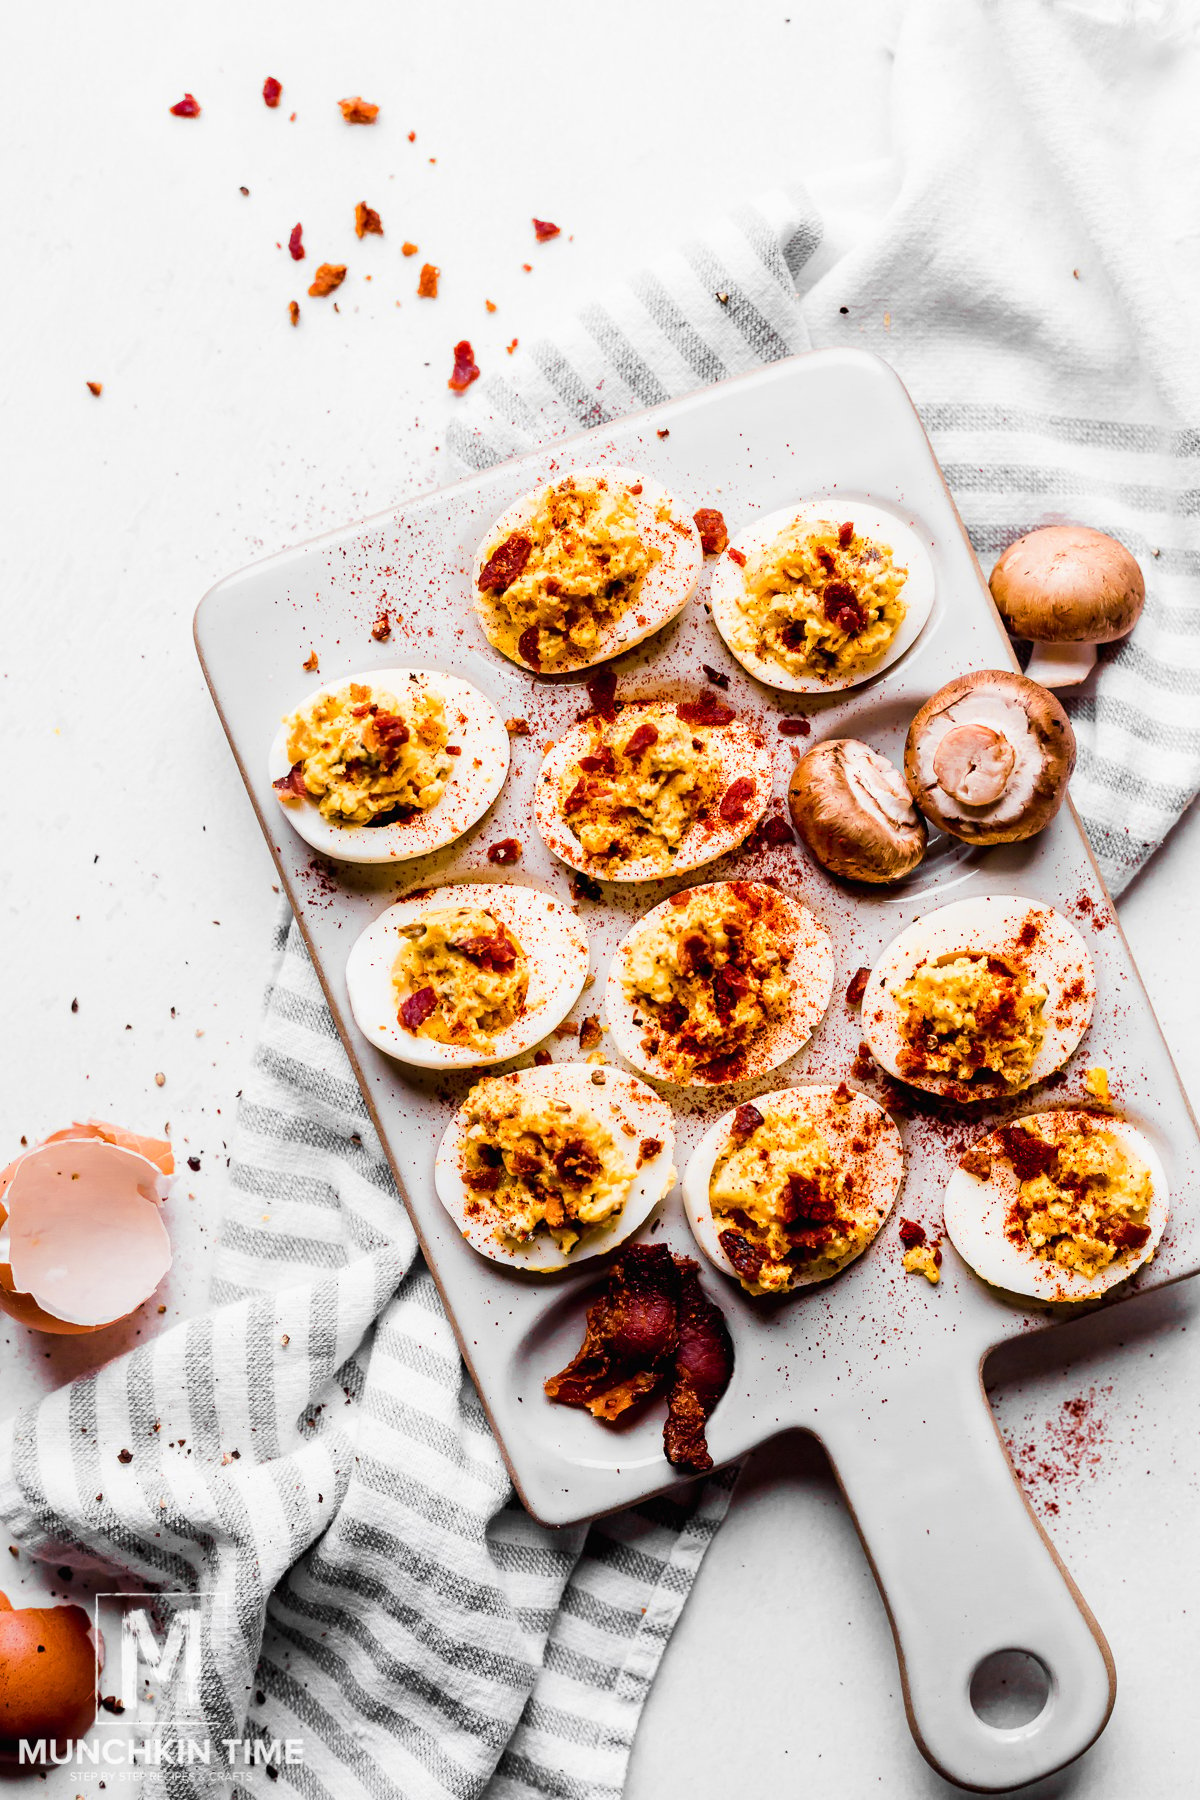 Best Deviled Eggs with Bacon (Instant Pot Hard Boiled Eggs)